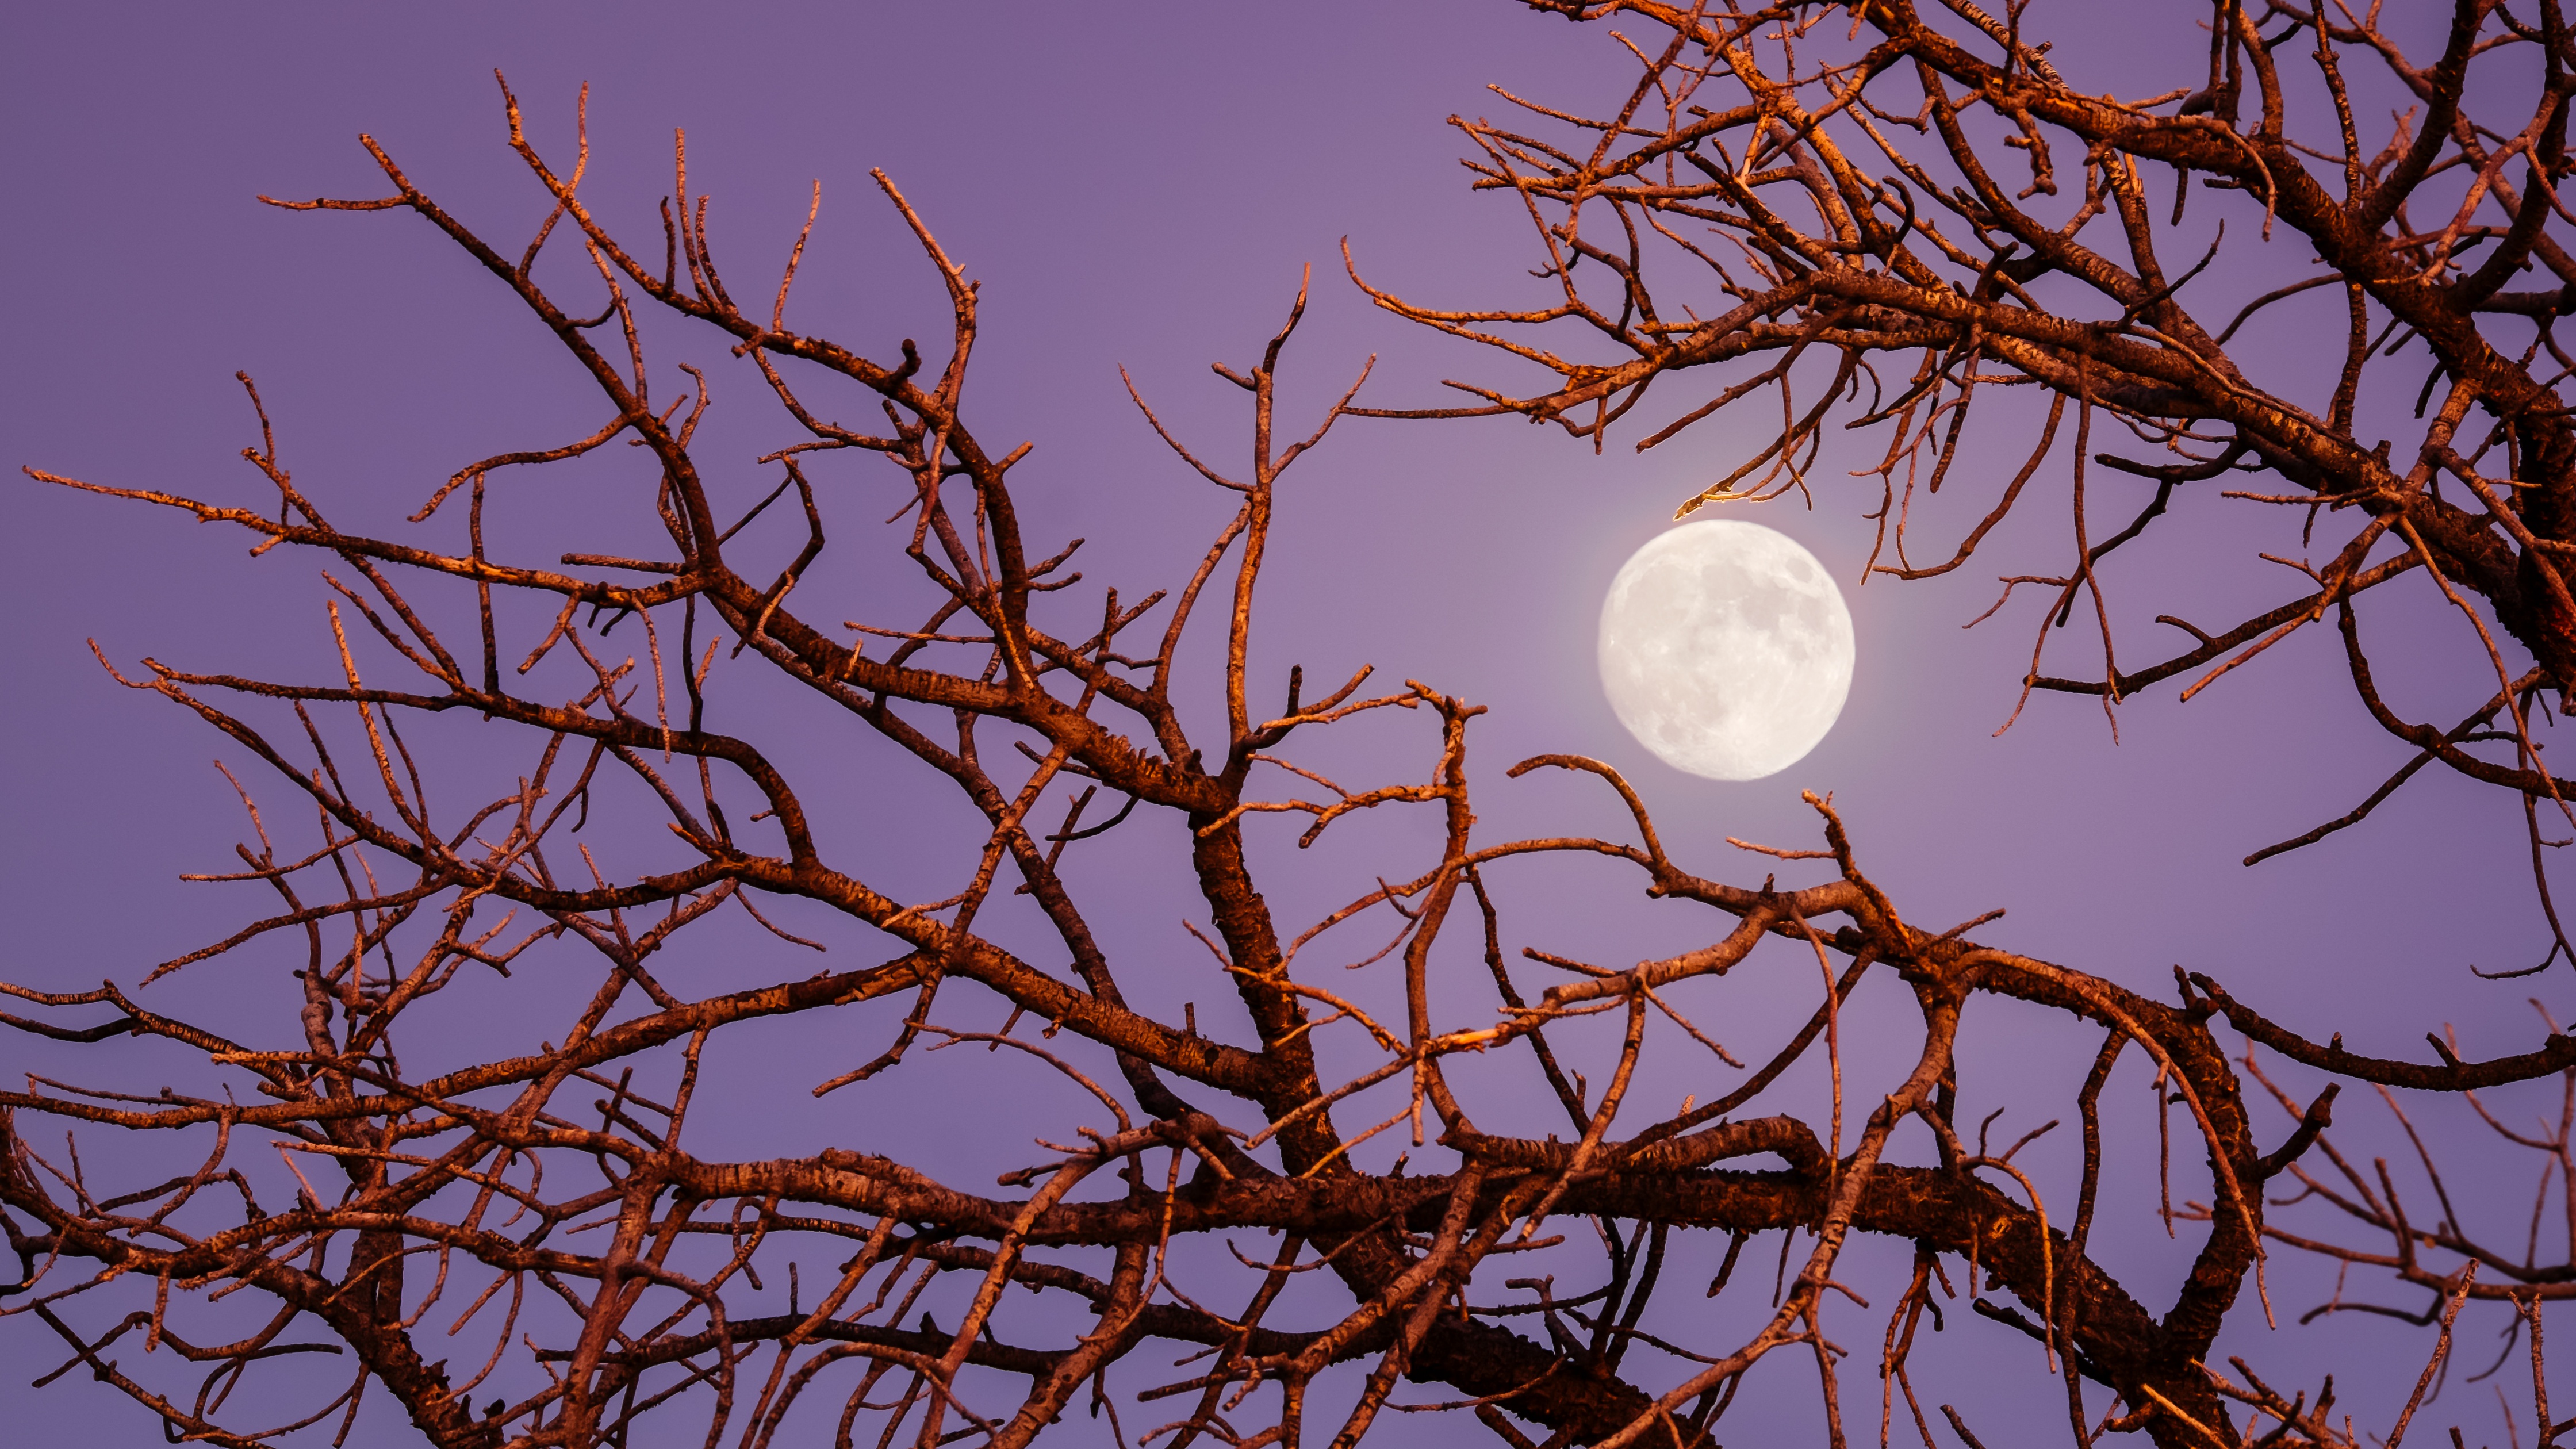 Twilight Moon Wallpaper 4K, Night, Tree Branches, Sky view, Aesthetic, 5K, Photography